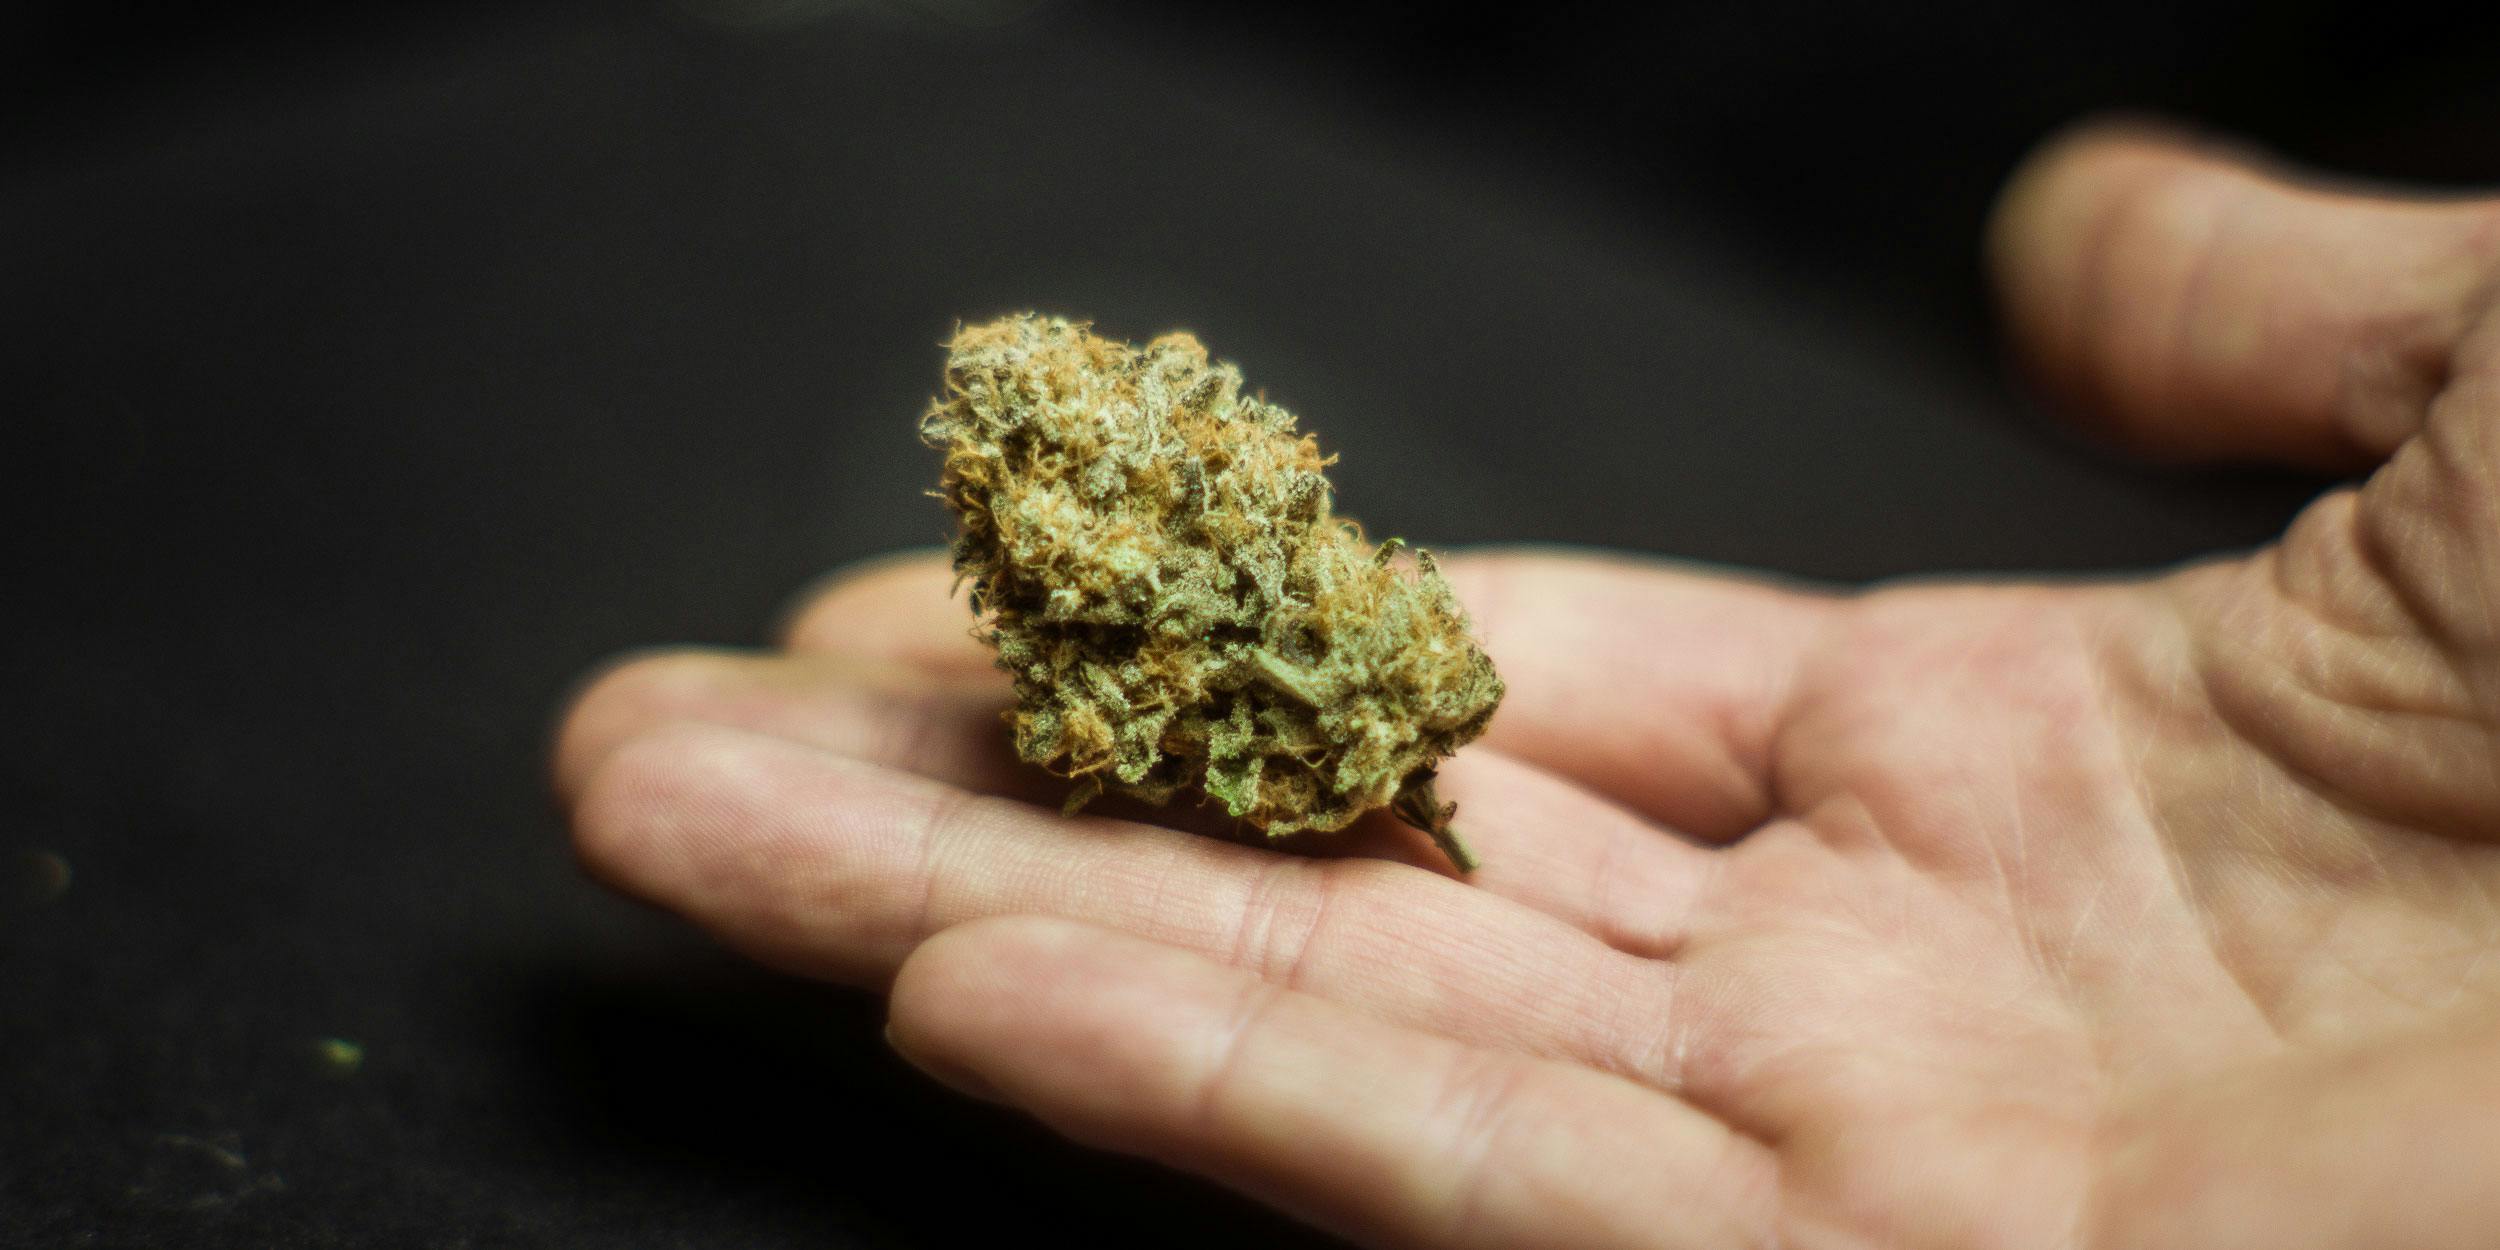 Pennsylvania Dispensary Gets in Trouble for Selling Dollar Grams. Here, a man is shown holding some a nug of bud in his hand